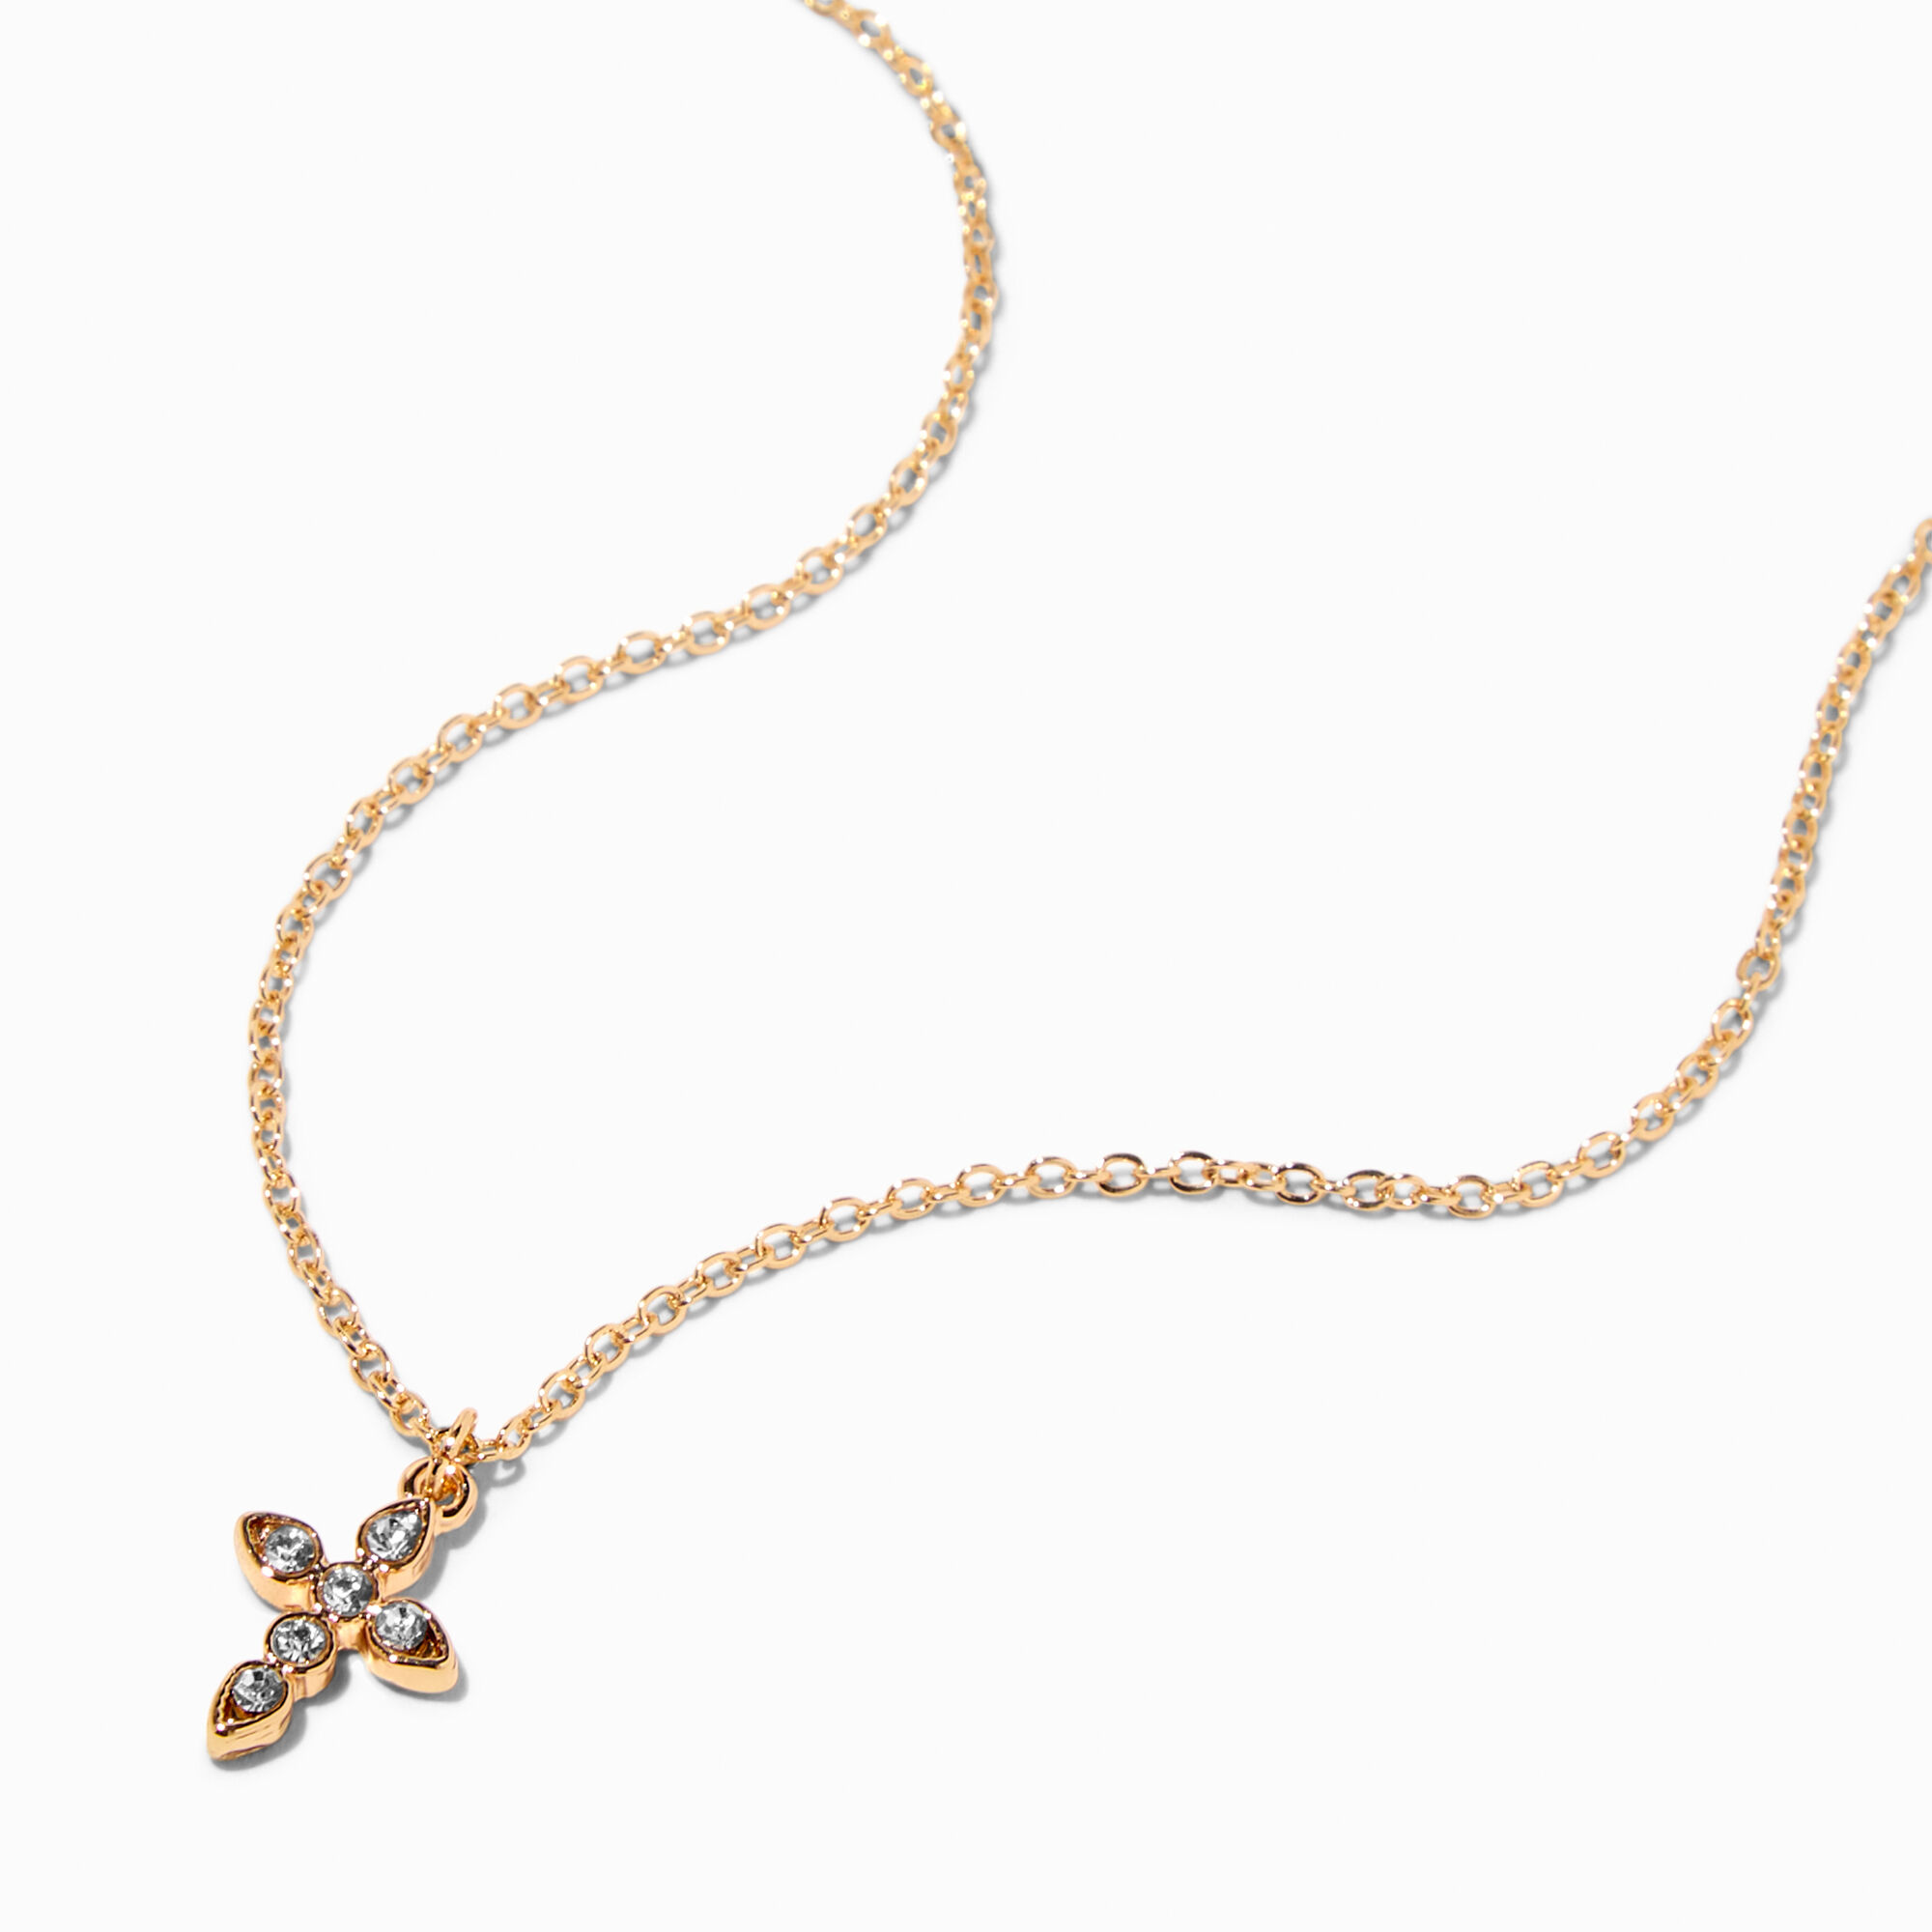 Crystal Cross Necklace - Gold - Ynez Project